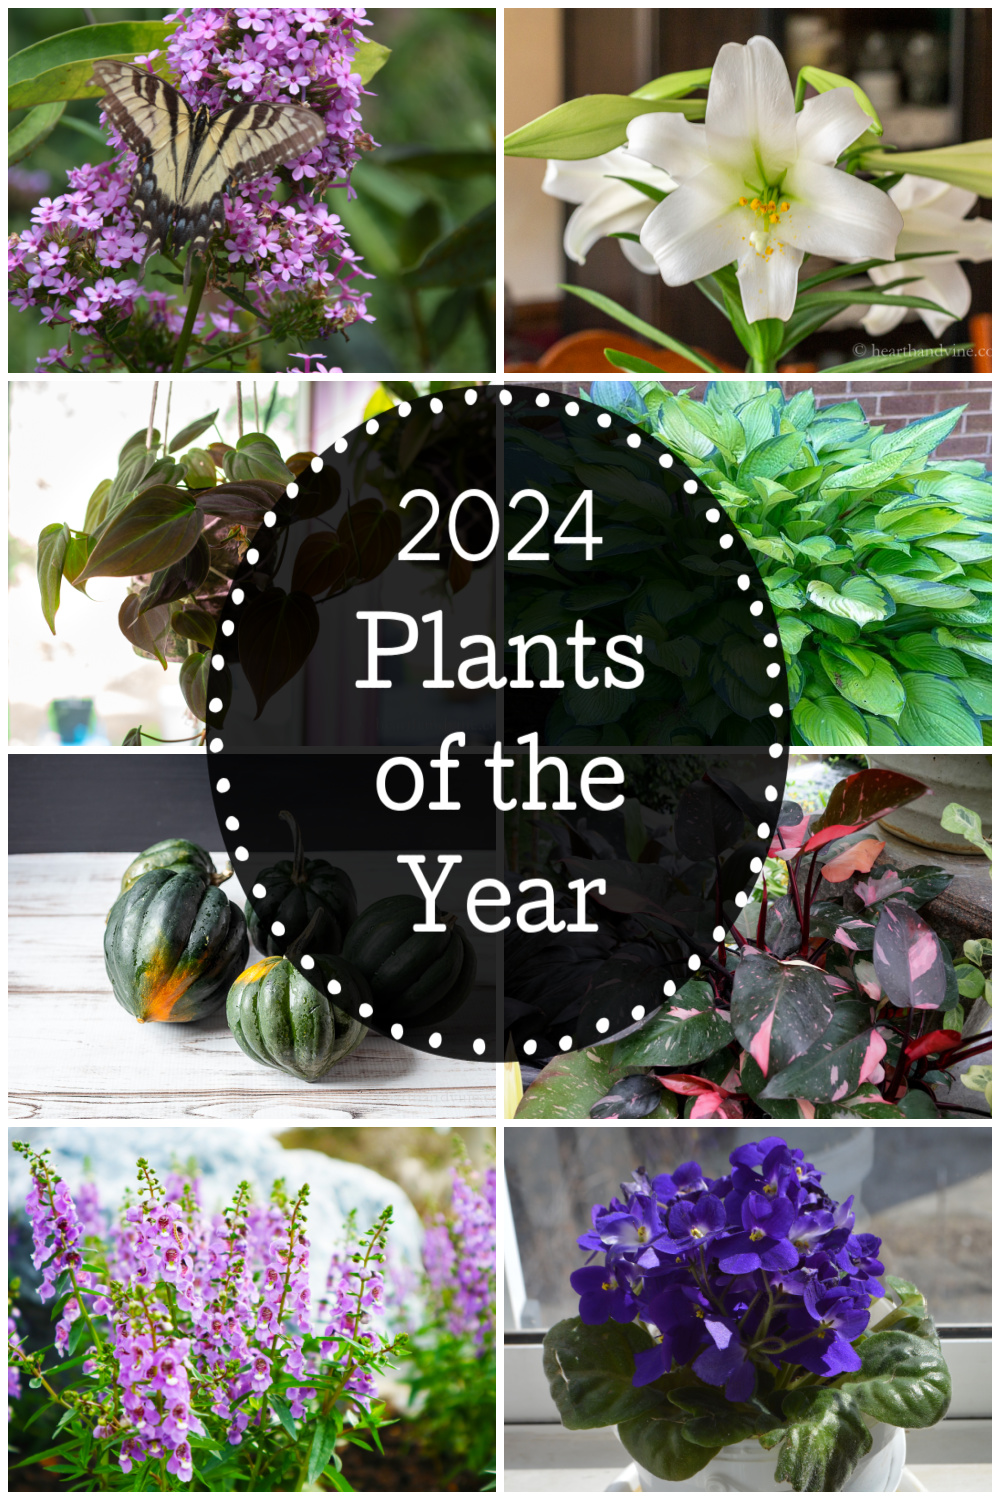 Collage of plants including hosta, lily, philodendren, phlox, algelonia, and violets.